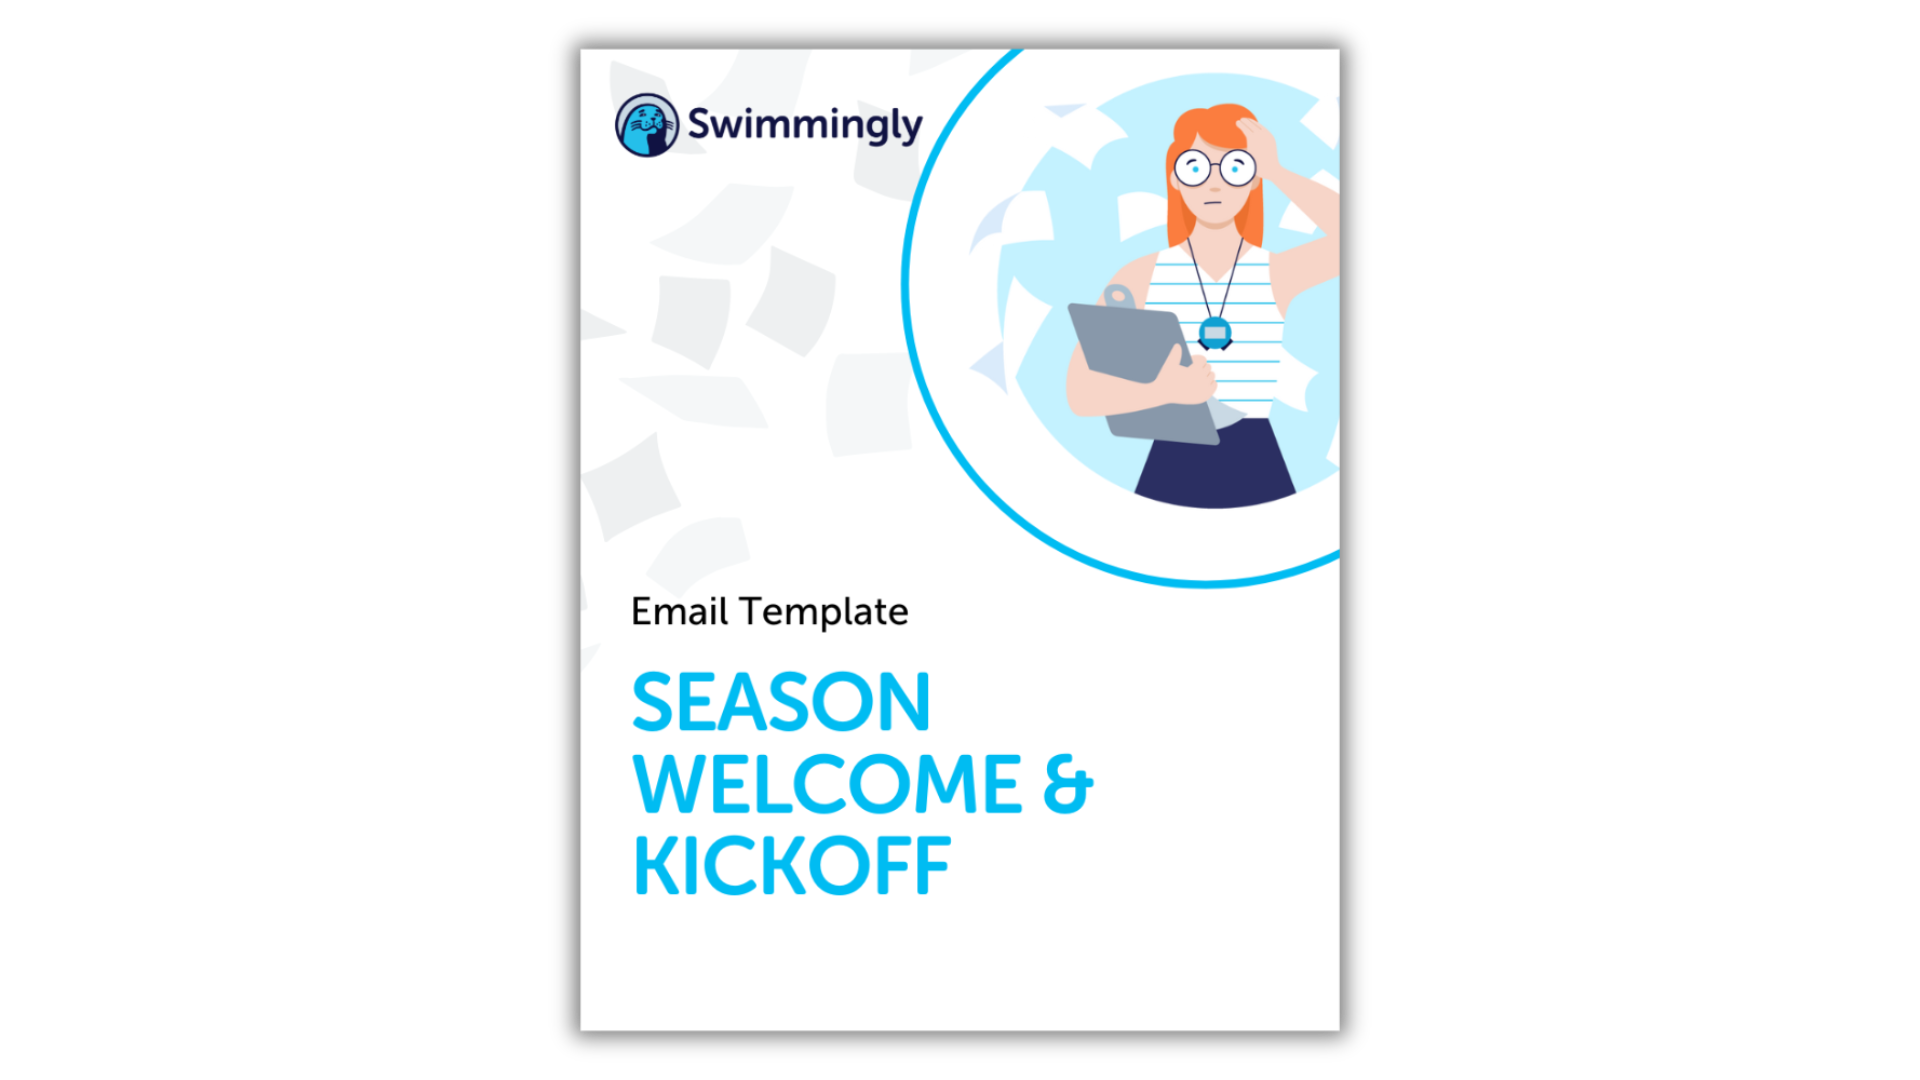 Email Template - Season Welcome & Kickoff